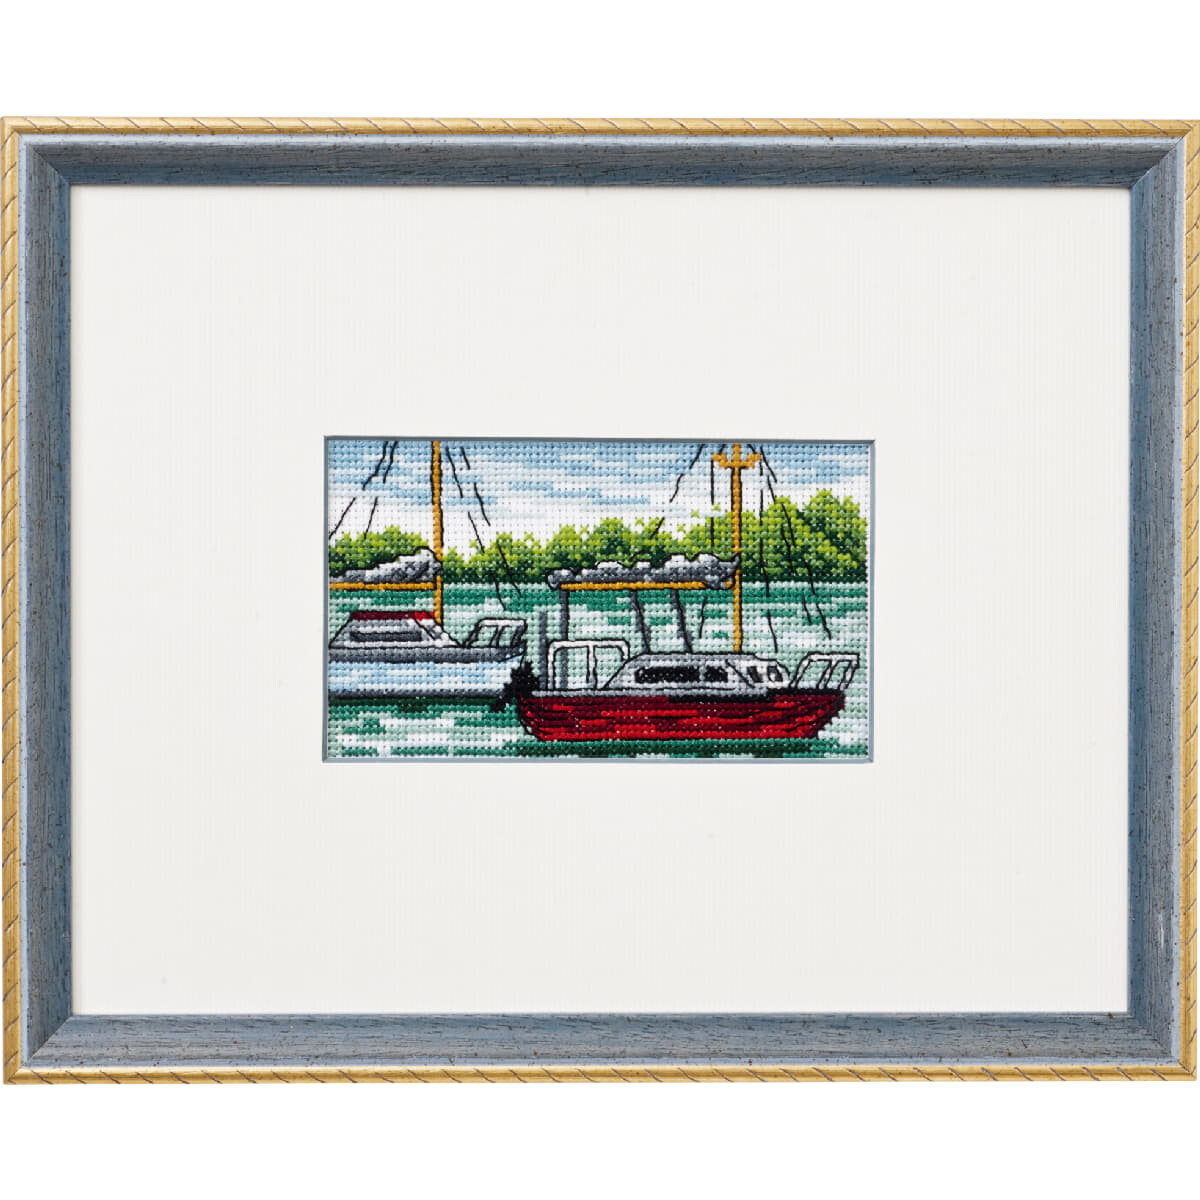 Permin counted cross stitch kit "Boats",...